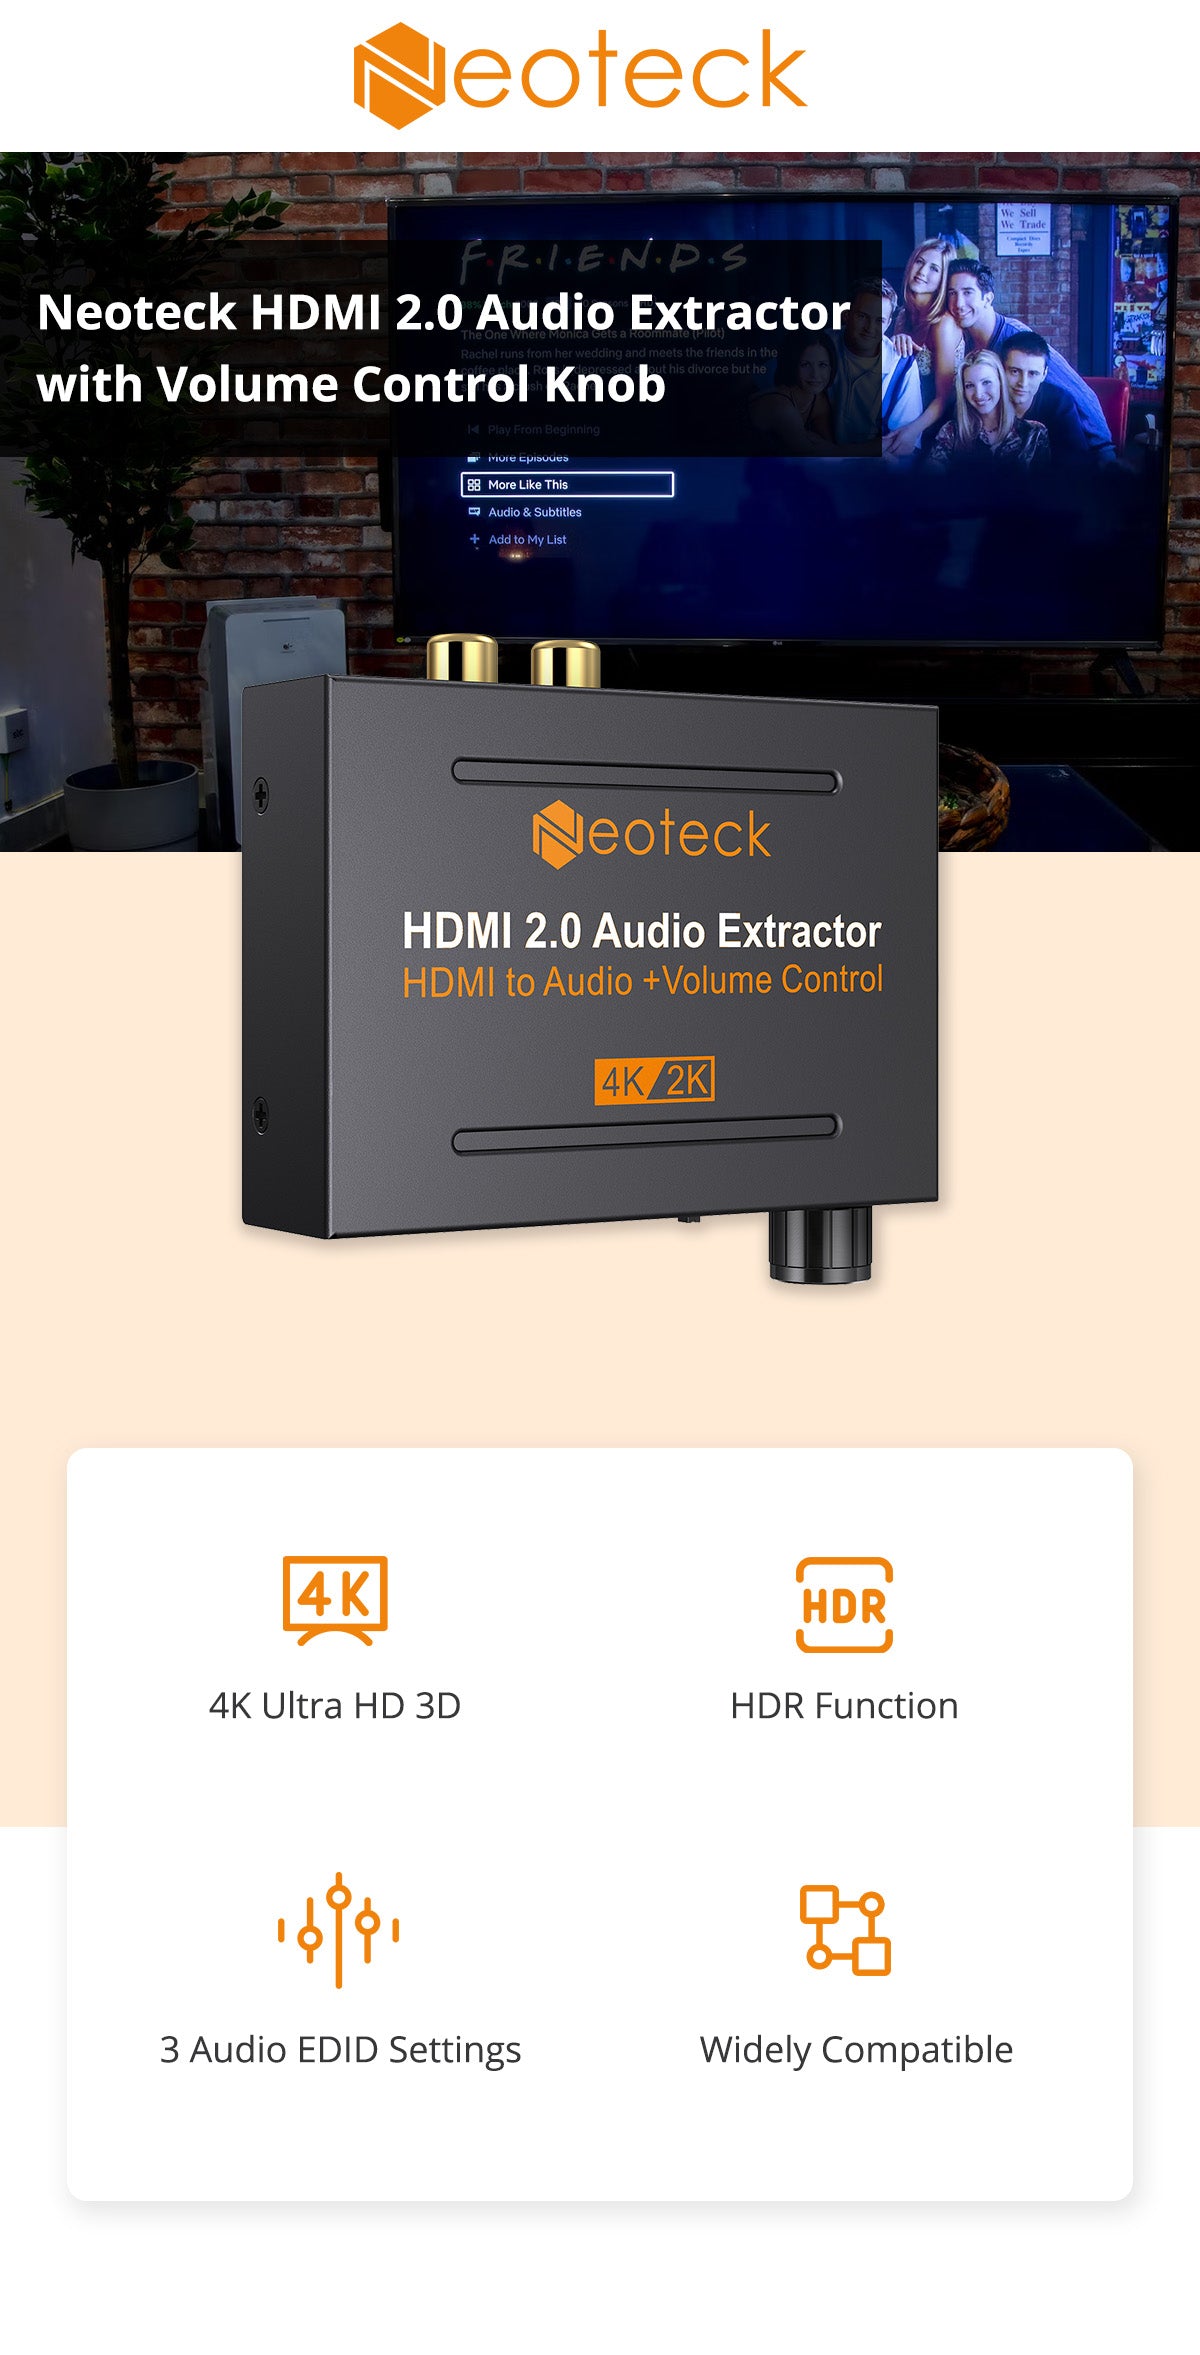 Neoteck HDMI 2.0 Audio Extractor Support 4K/60Hz YUV 4:4:4 and HDR